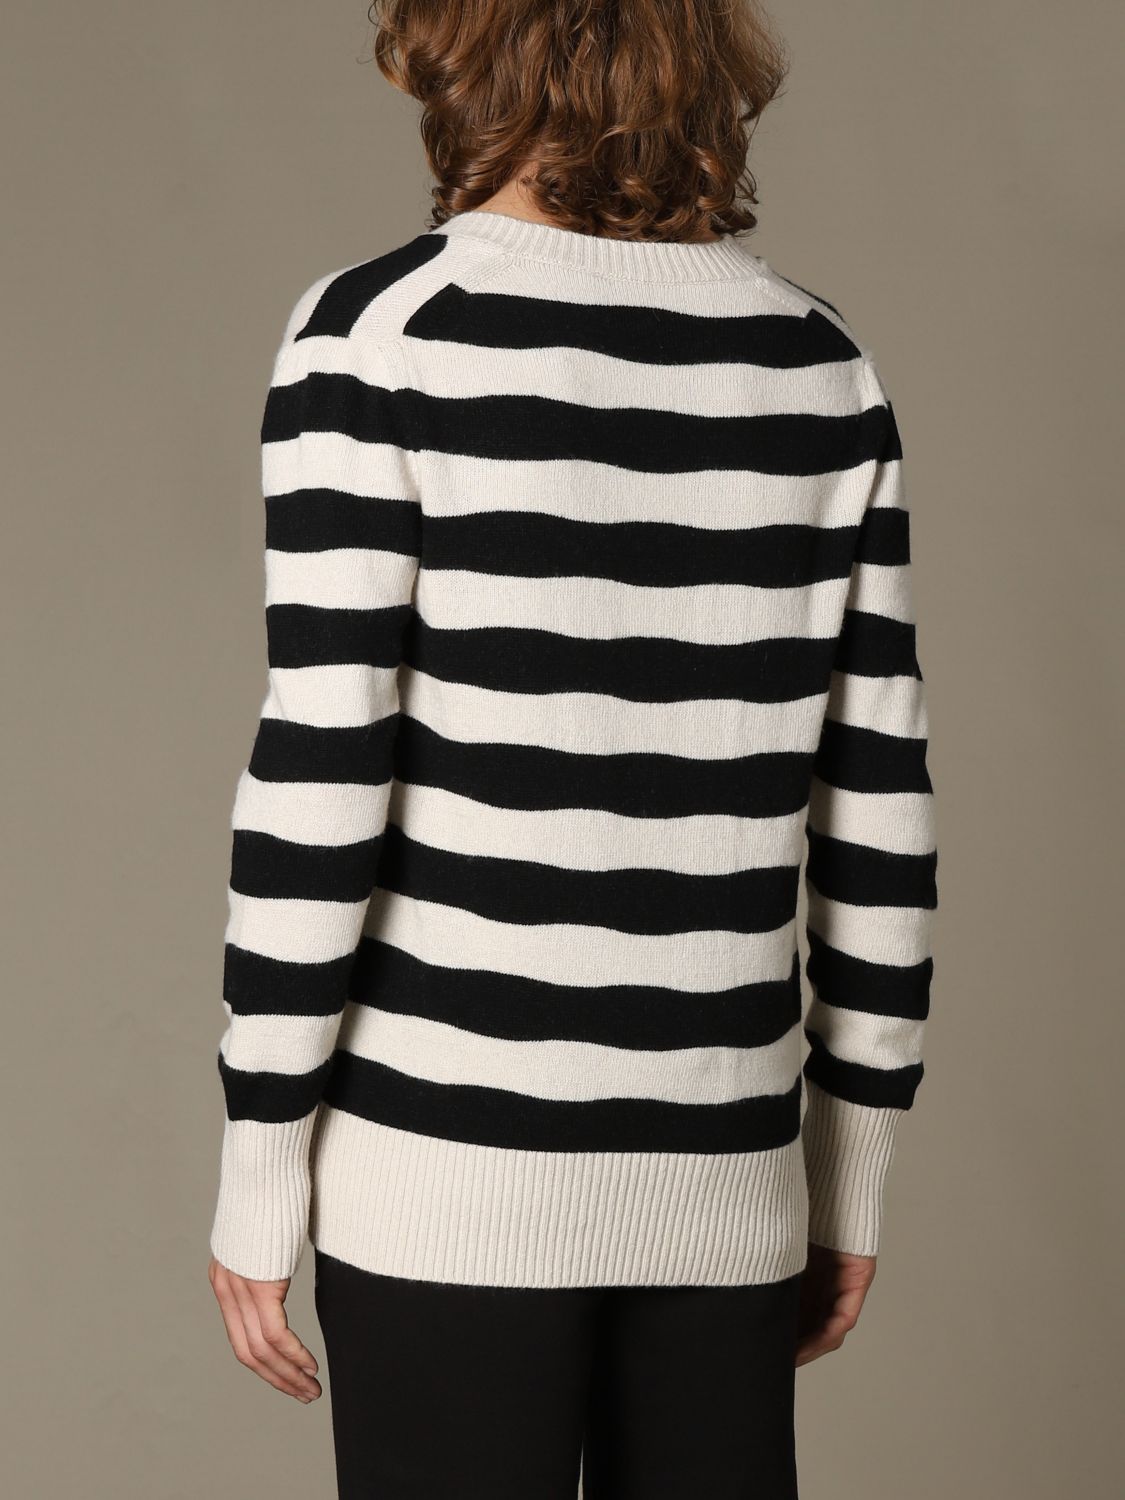 MESSAGERIE: Striped v-neck sweater - Black | Messagerie sweater 041252 ...